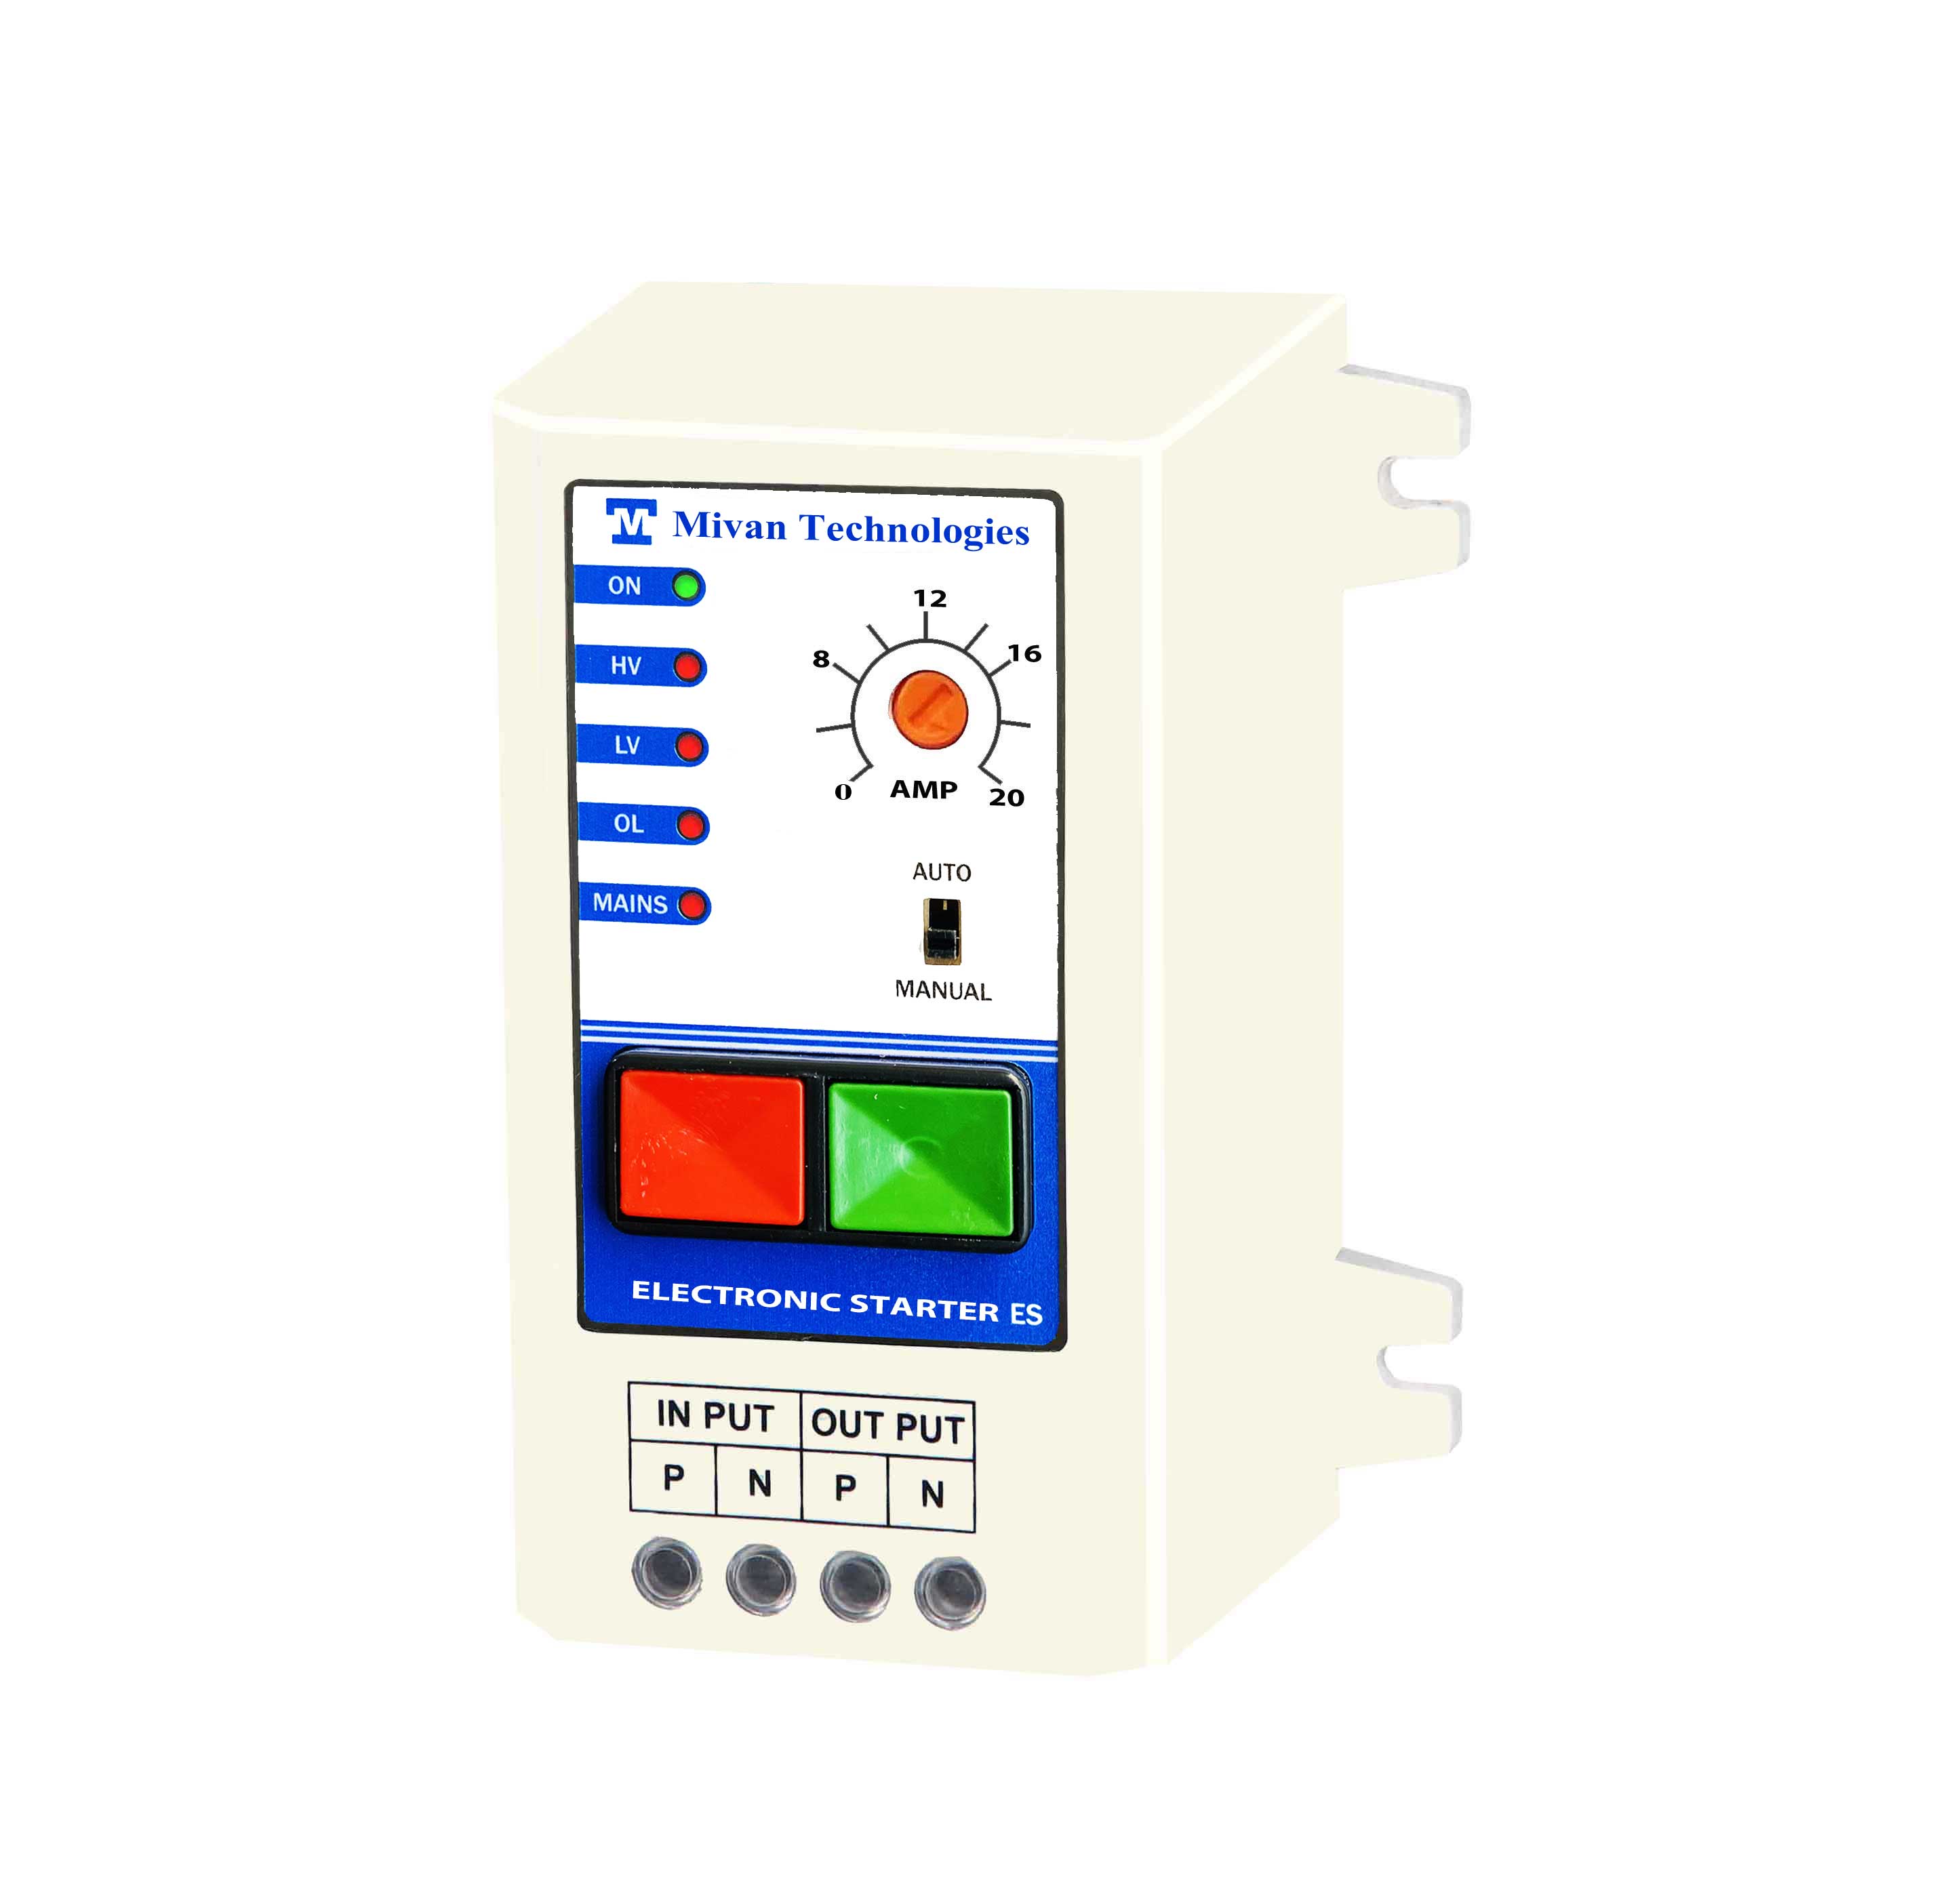 Single Phase motor starter  with high low voltage and overload protection suitable for all single phase appliances Suitable up to 3 hp motor  ES